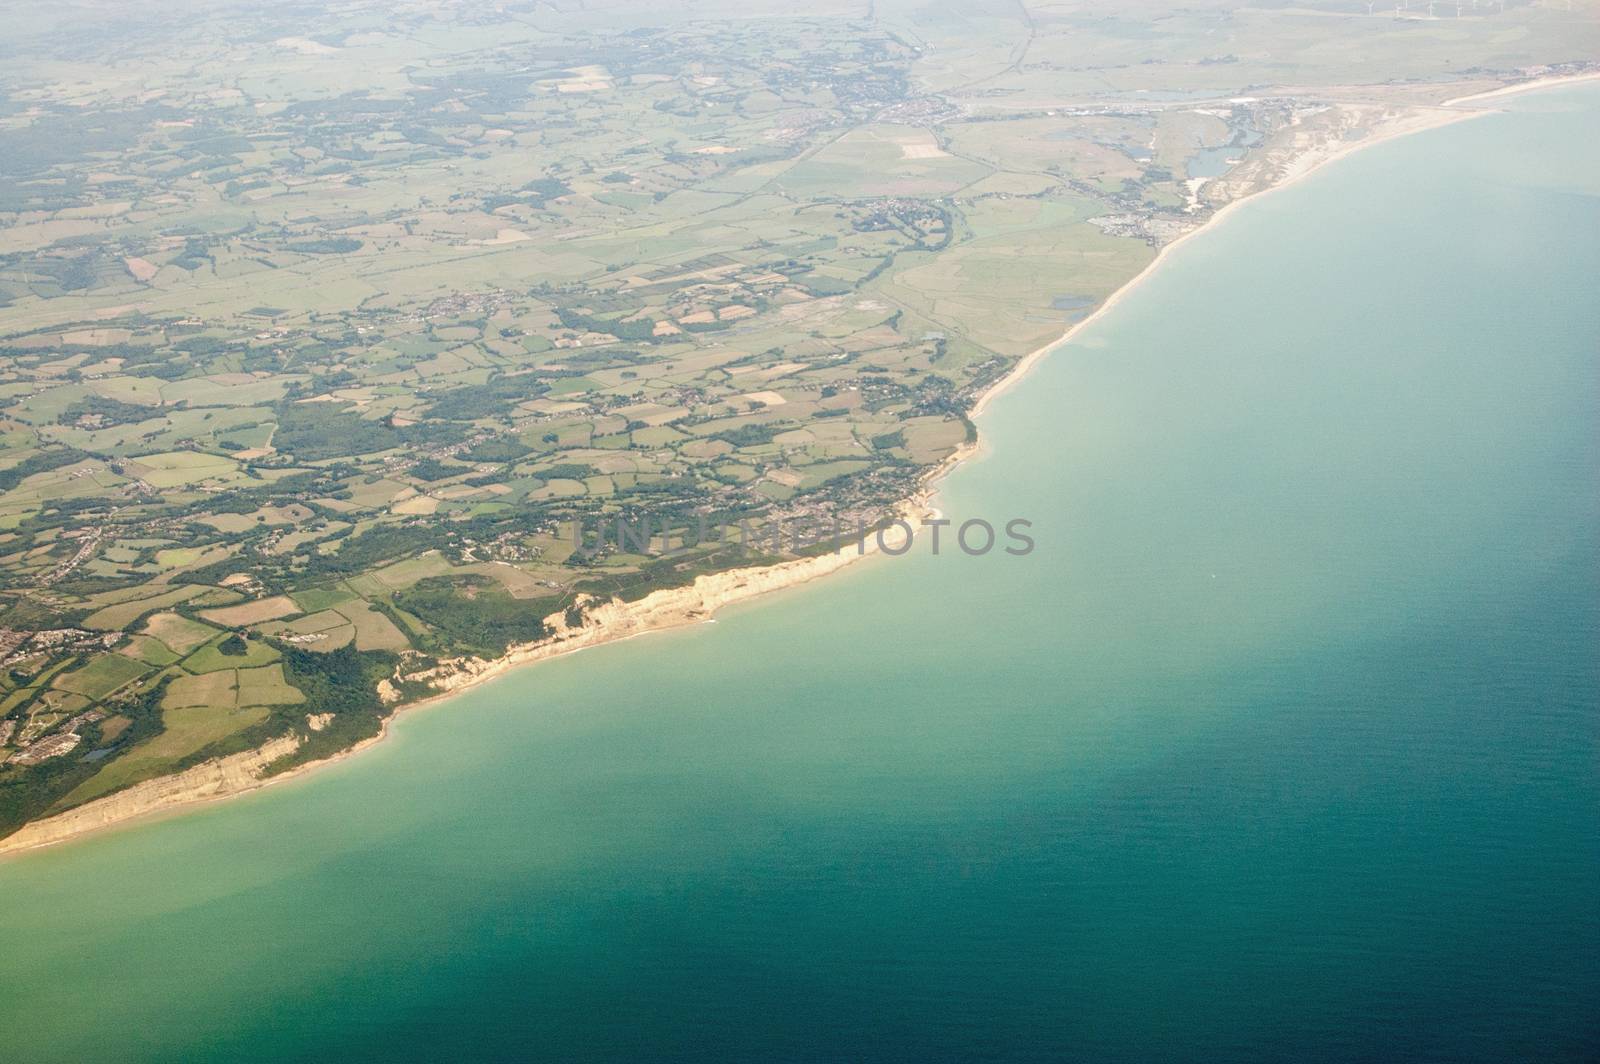 Aerial view of the coast at Sussex with Fairlight in the foreground stretching to Winchelsea and Camber Sands in the distance.  